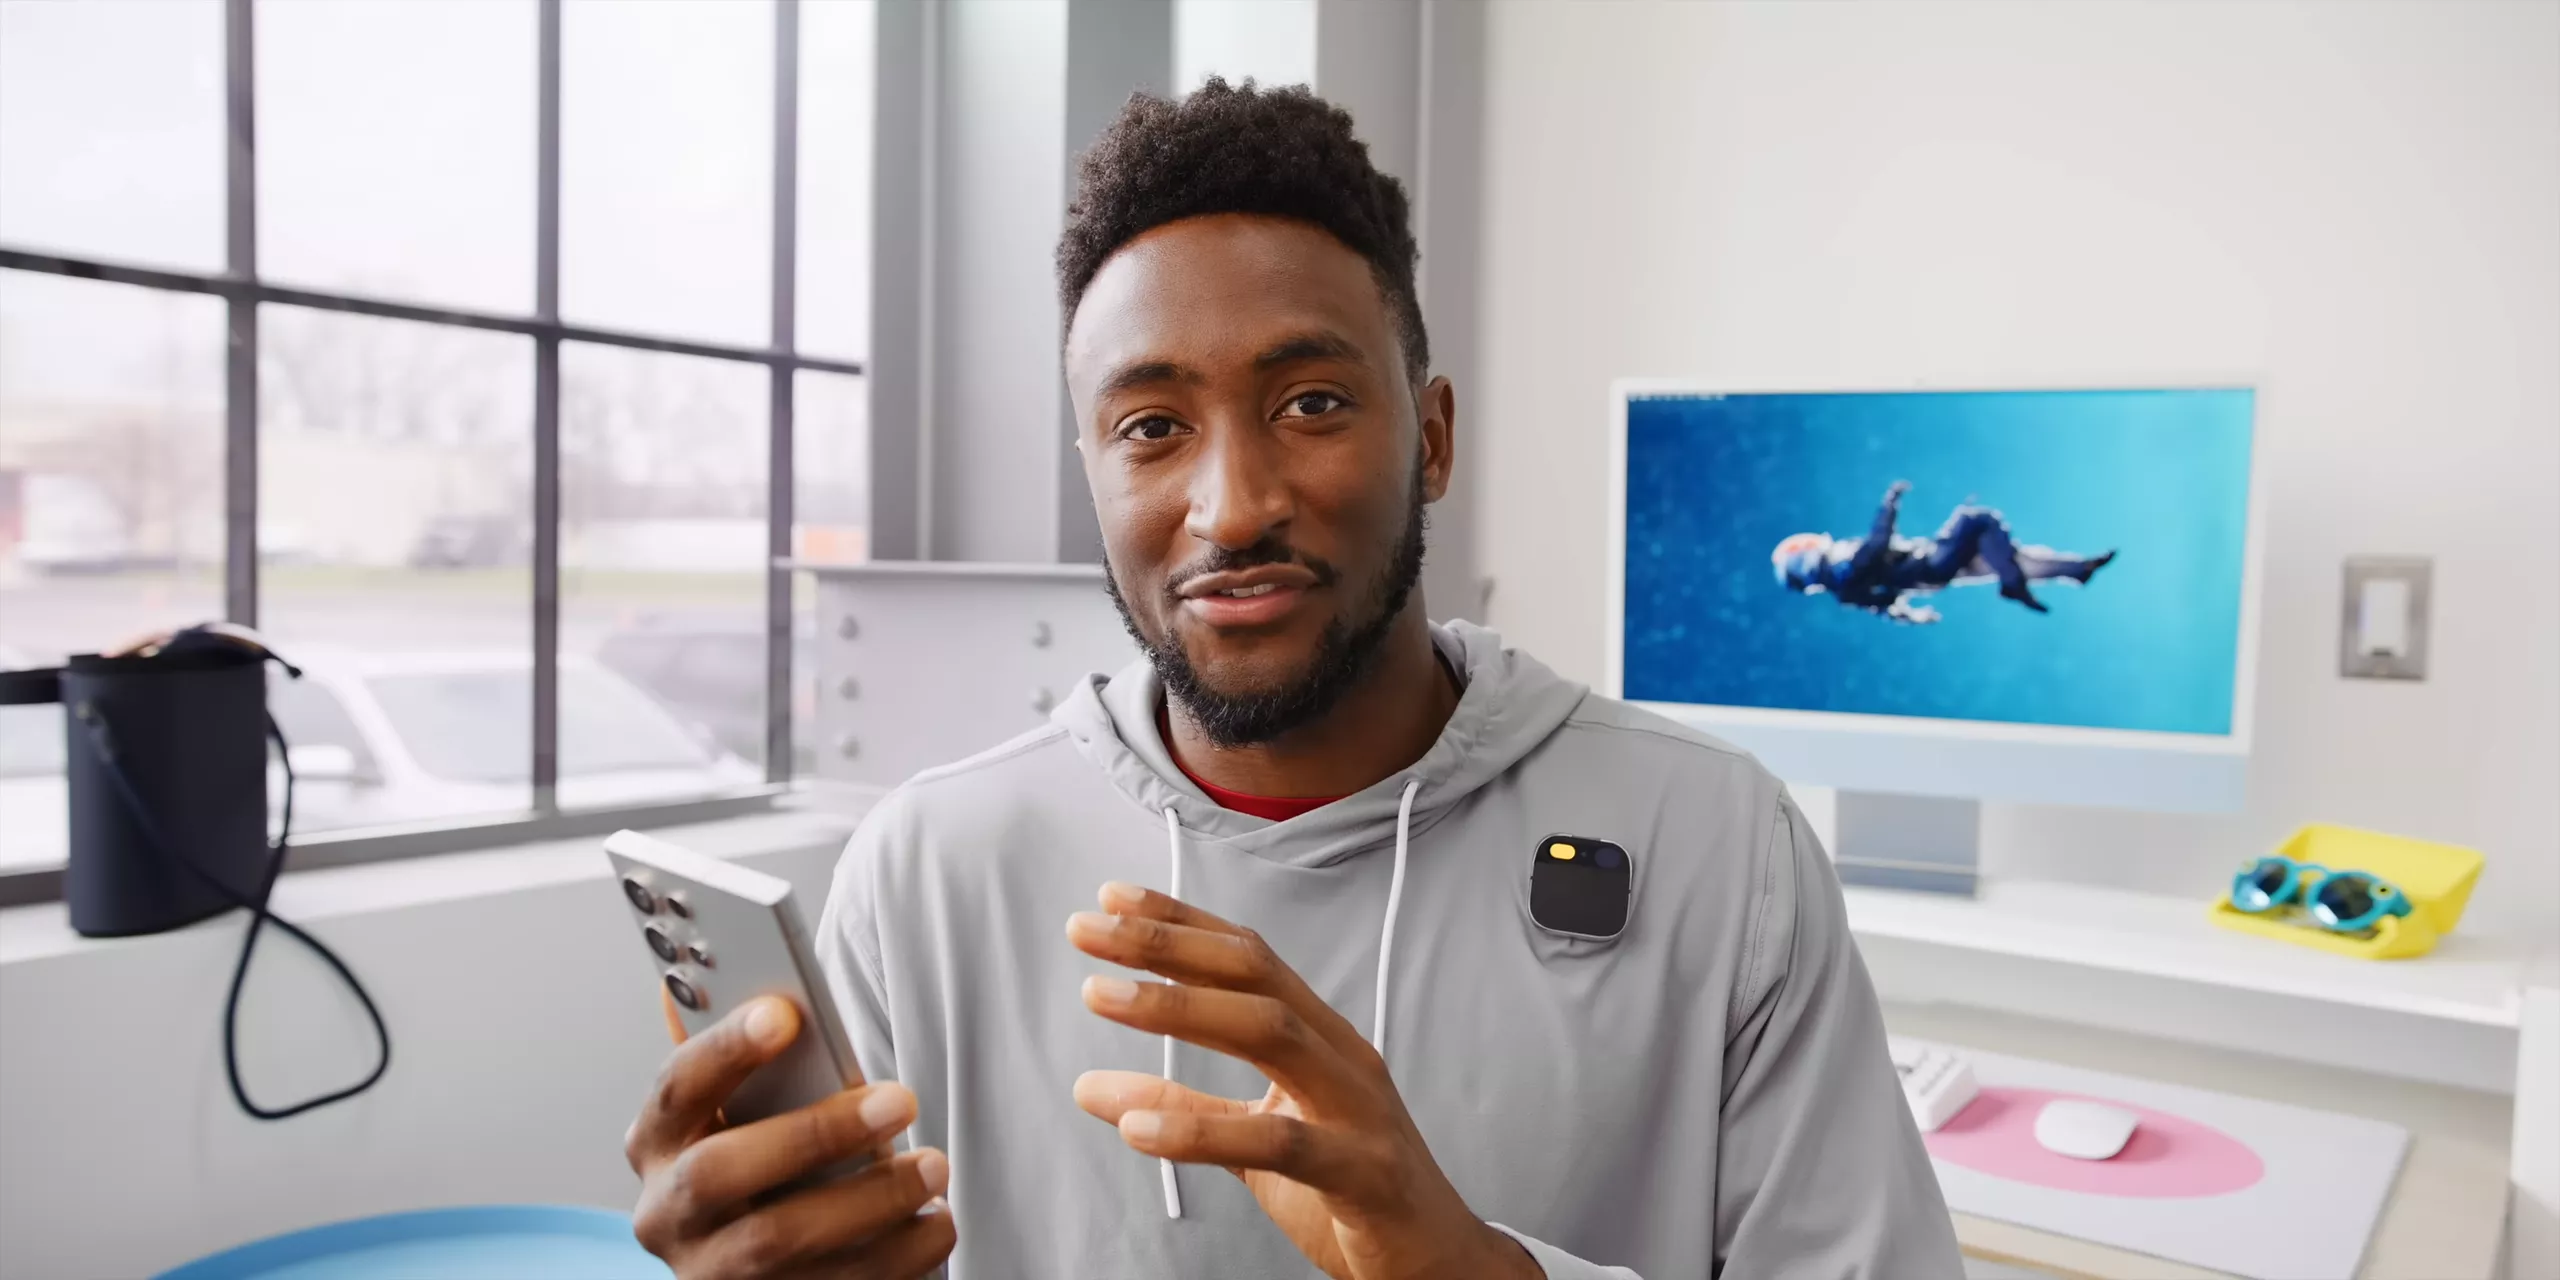 YouTube star Marques Brownlee's scathing Humane Ai Pin review leads to argument over ethics and influence